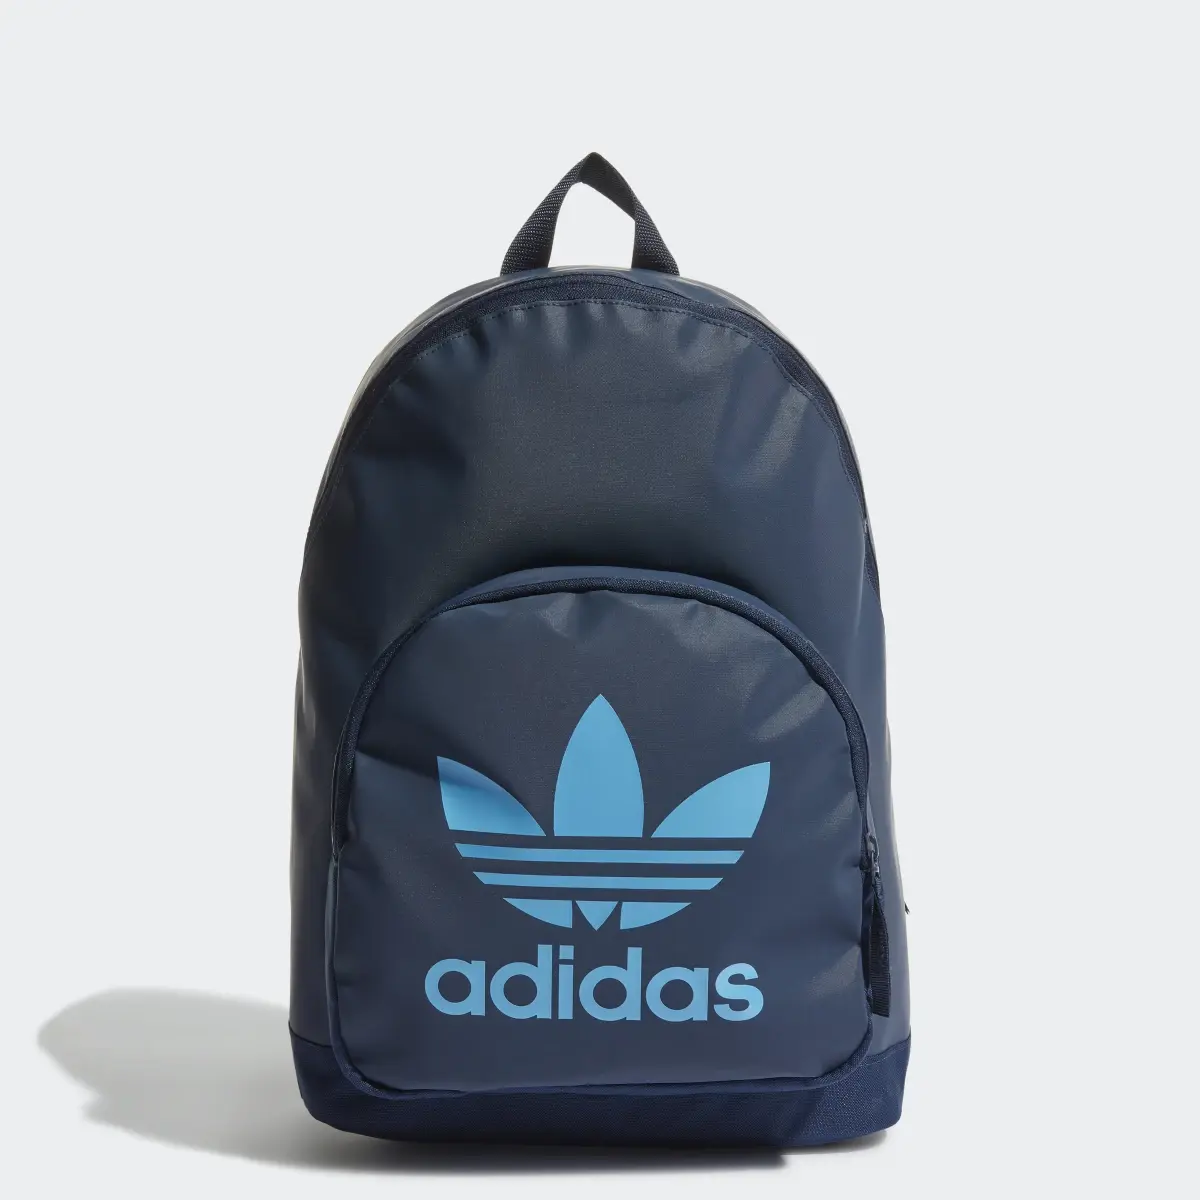 Adidas Adicolor Archive Backpack. 1